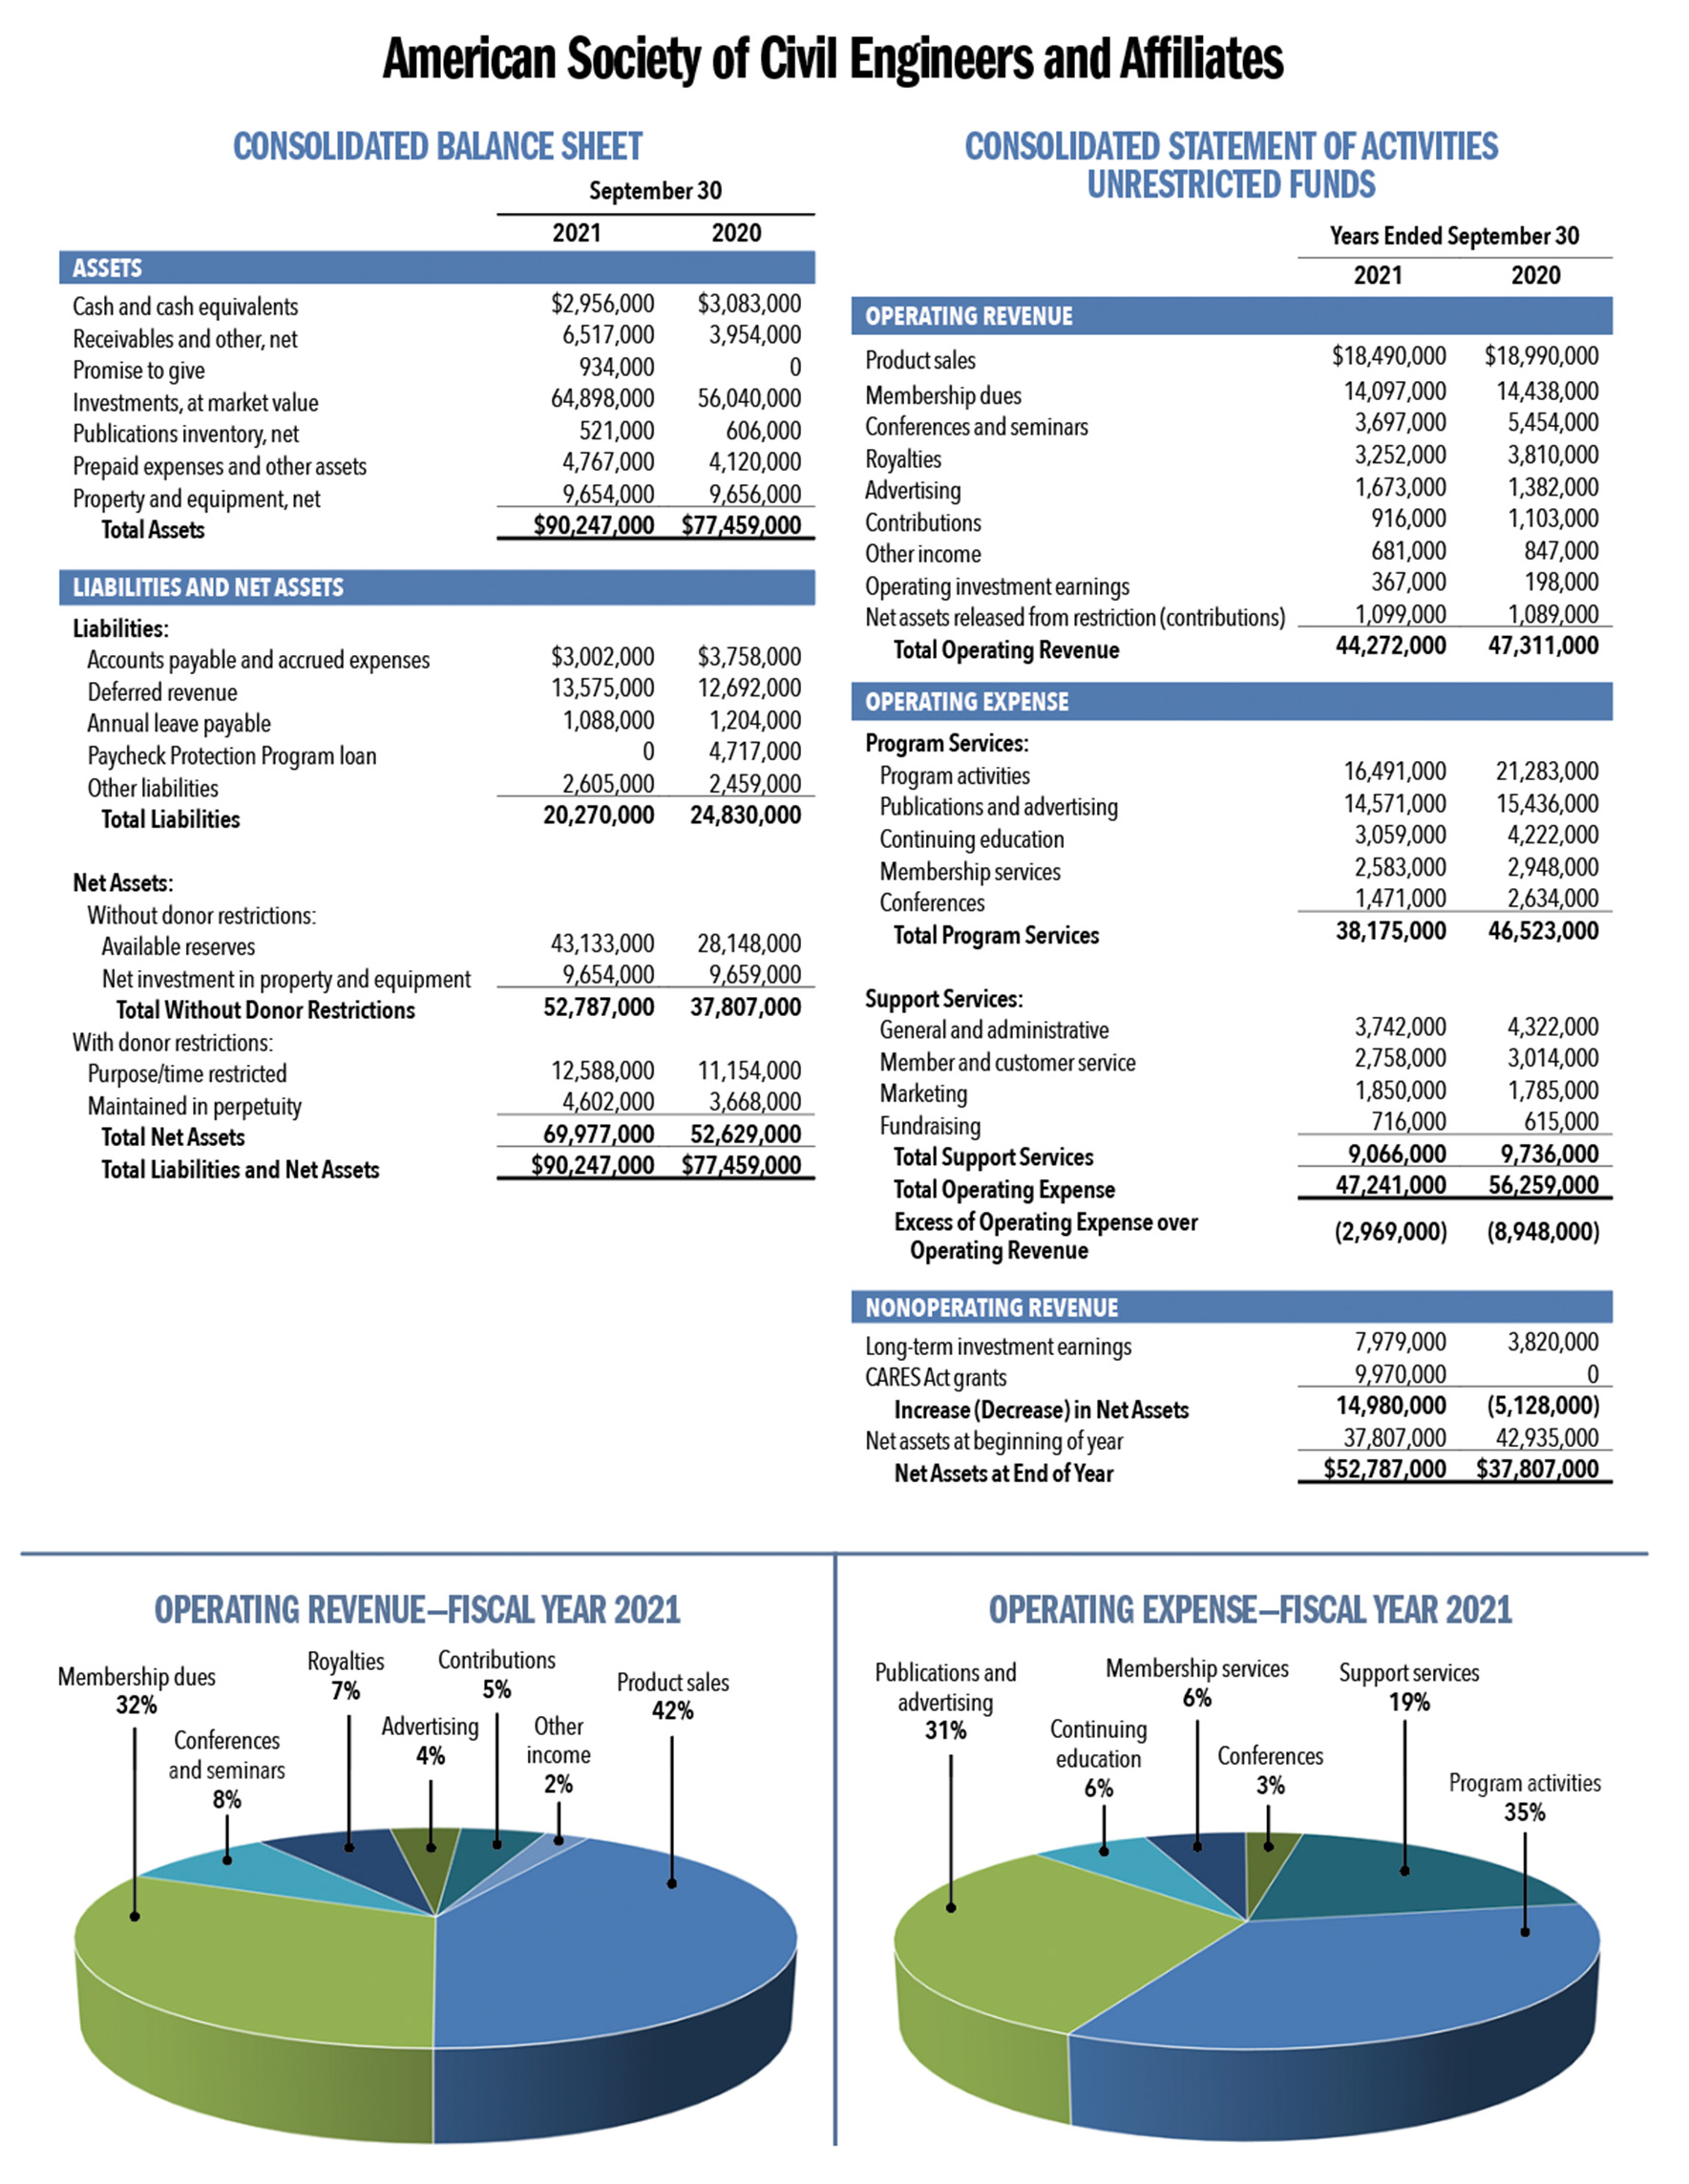 image shows the asce consolidated balance sheet and the consolidated statement of activities unrestricted funds. we also see diagrams that depict the operating revenue and operating expenses for 2021